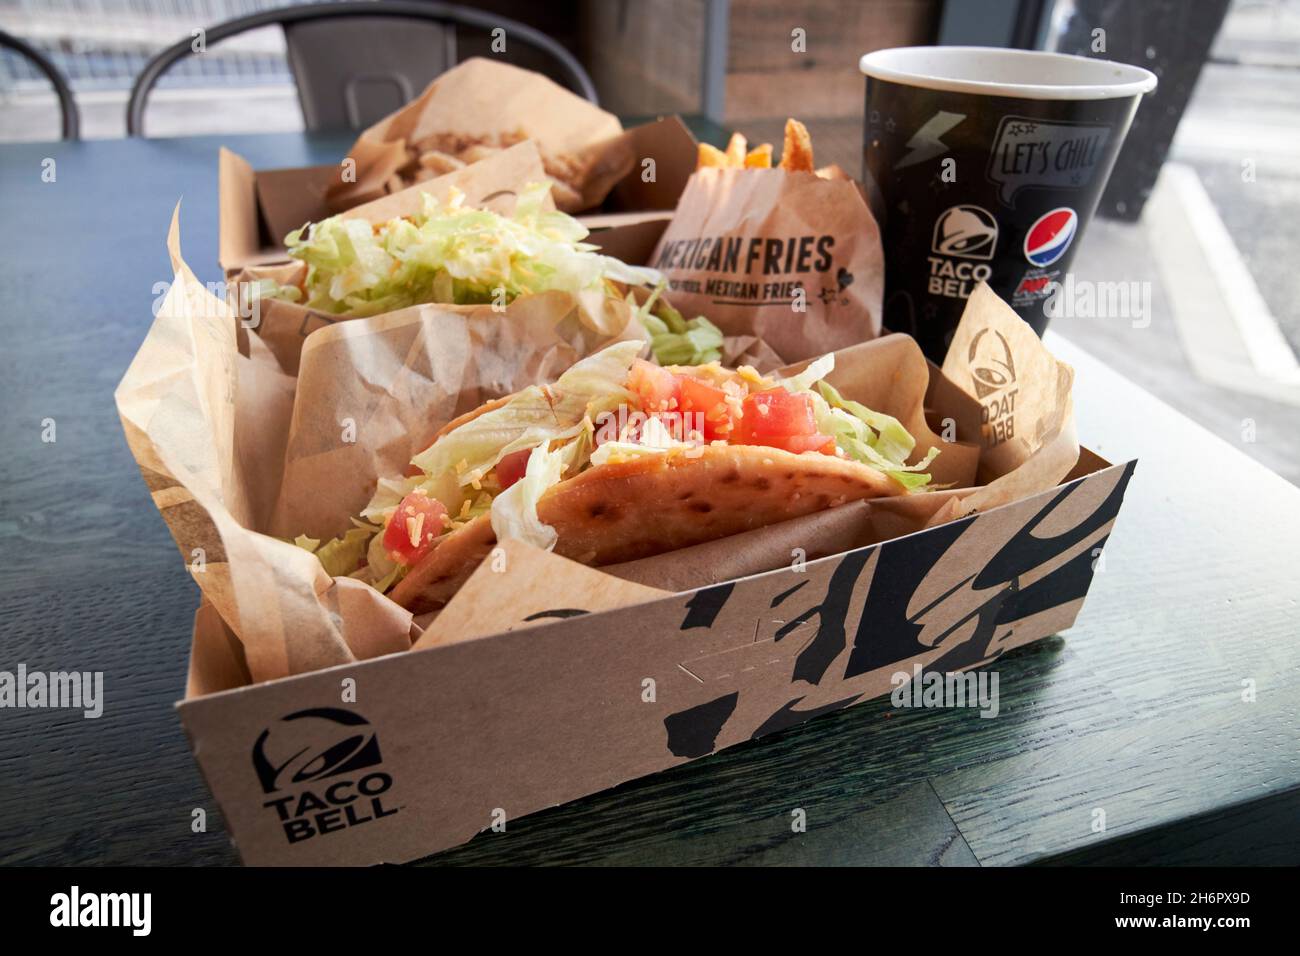 taco bell 5 pounds chalupa cravings box fast food Liverpool merseyside uk Stock Photo